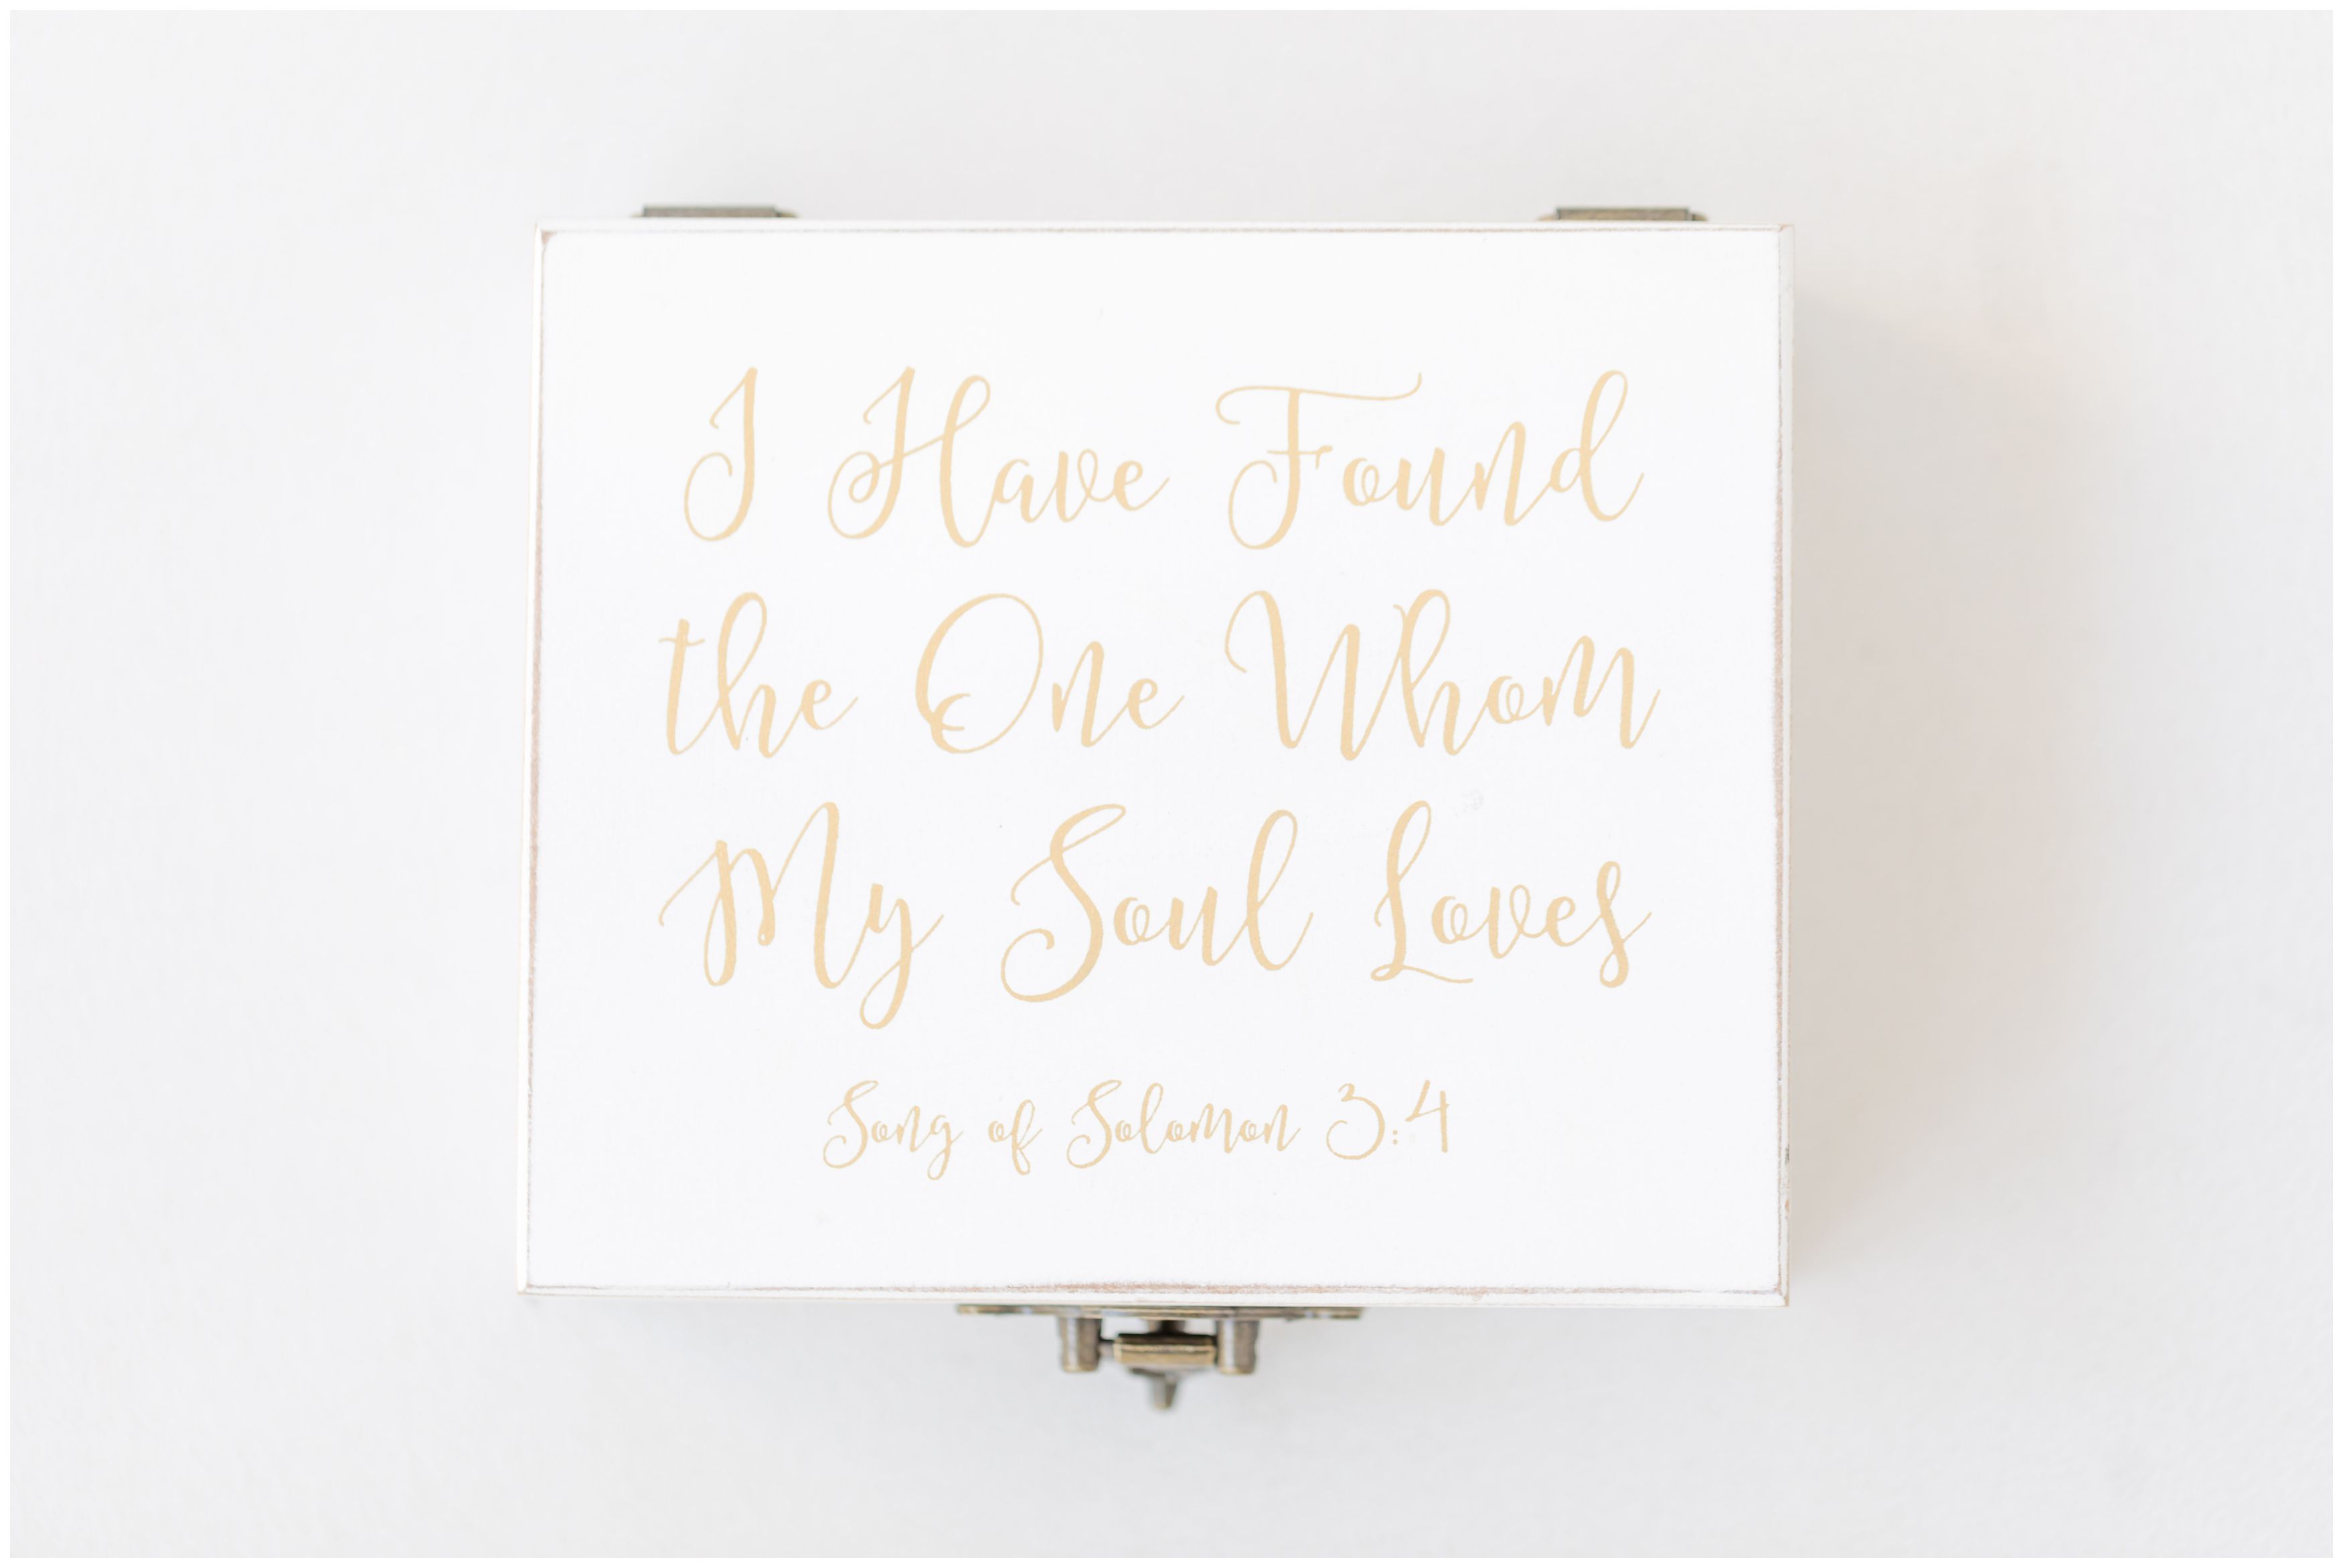 Wedding ring box Song of Solomon 3:4 I have found the one whom my soul loves